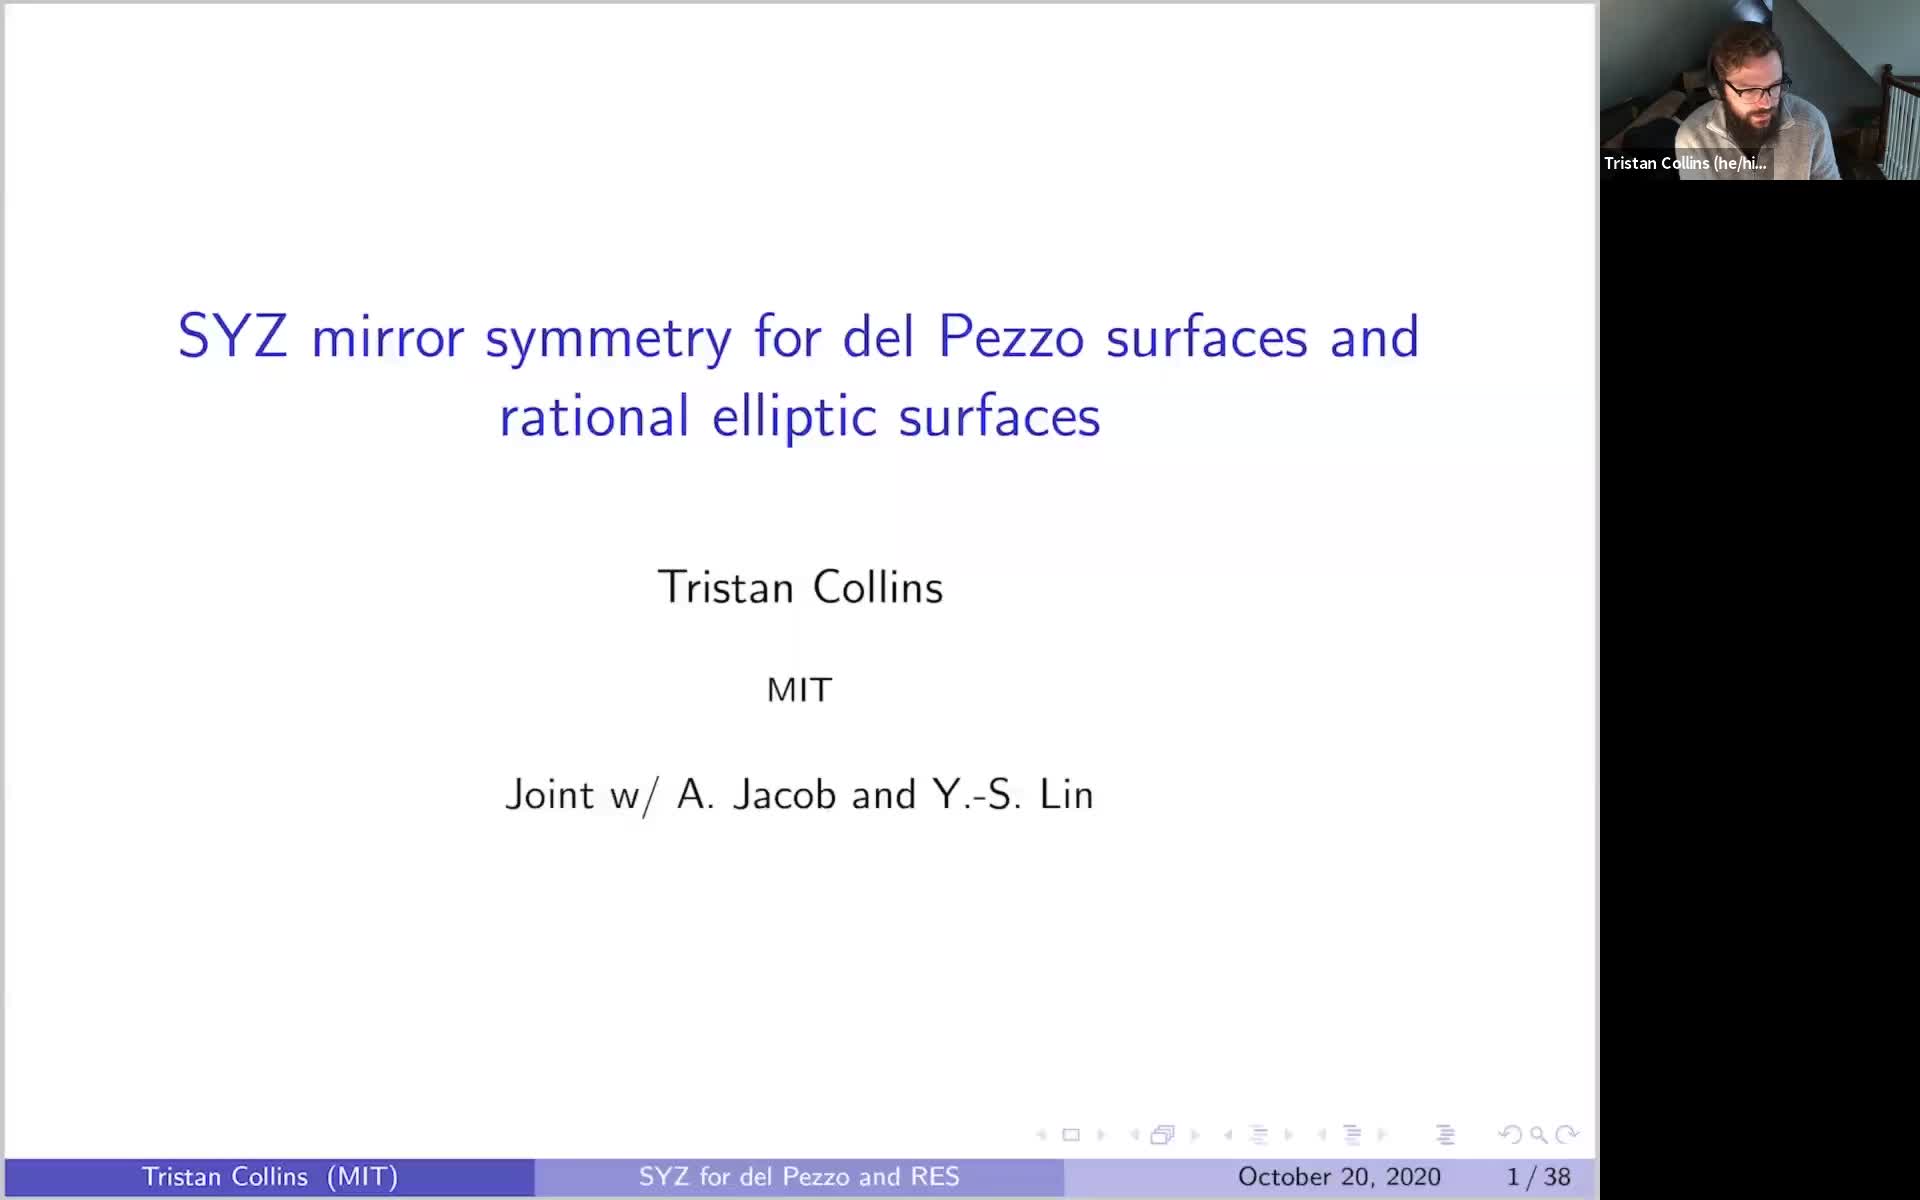 2020.10.20 SYZ mirror symmetry for del Pezzo surfaces and rational elliptic surfaces